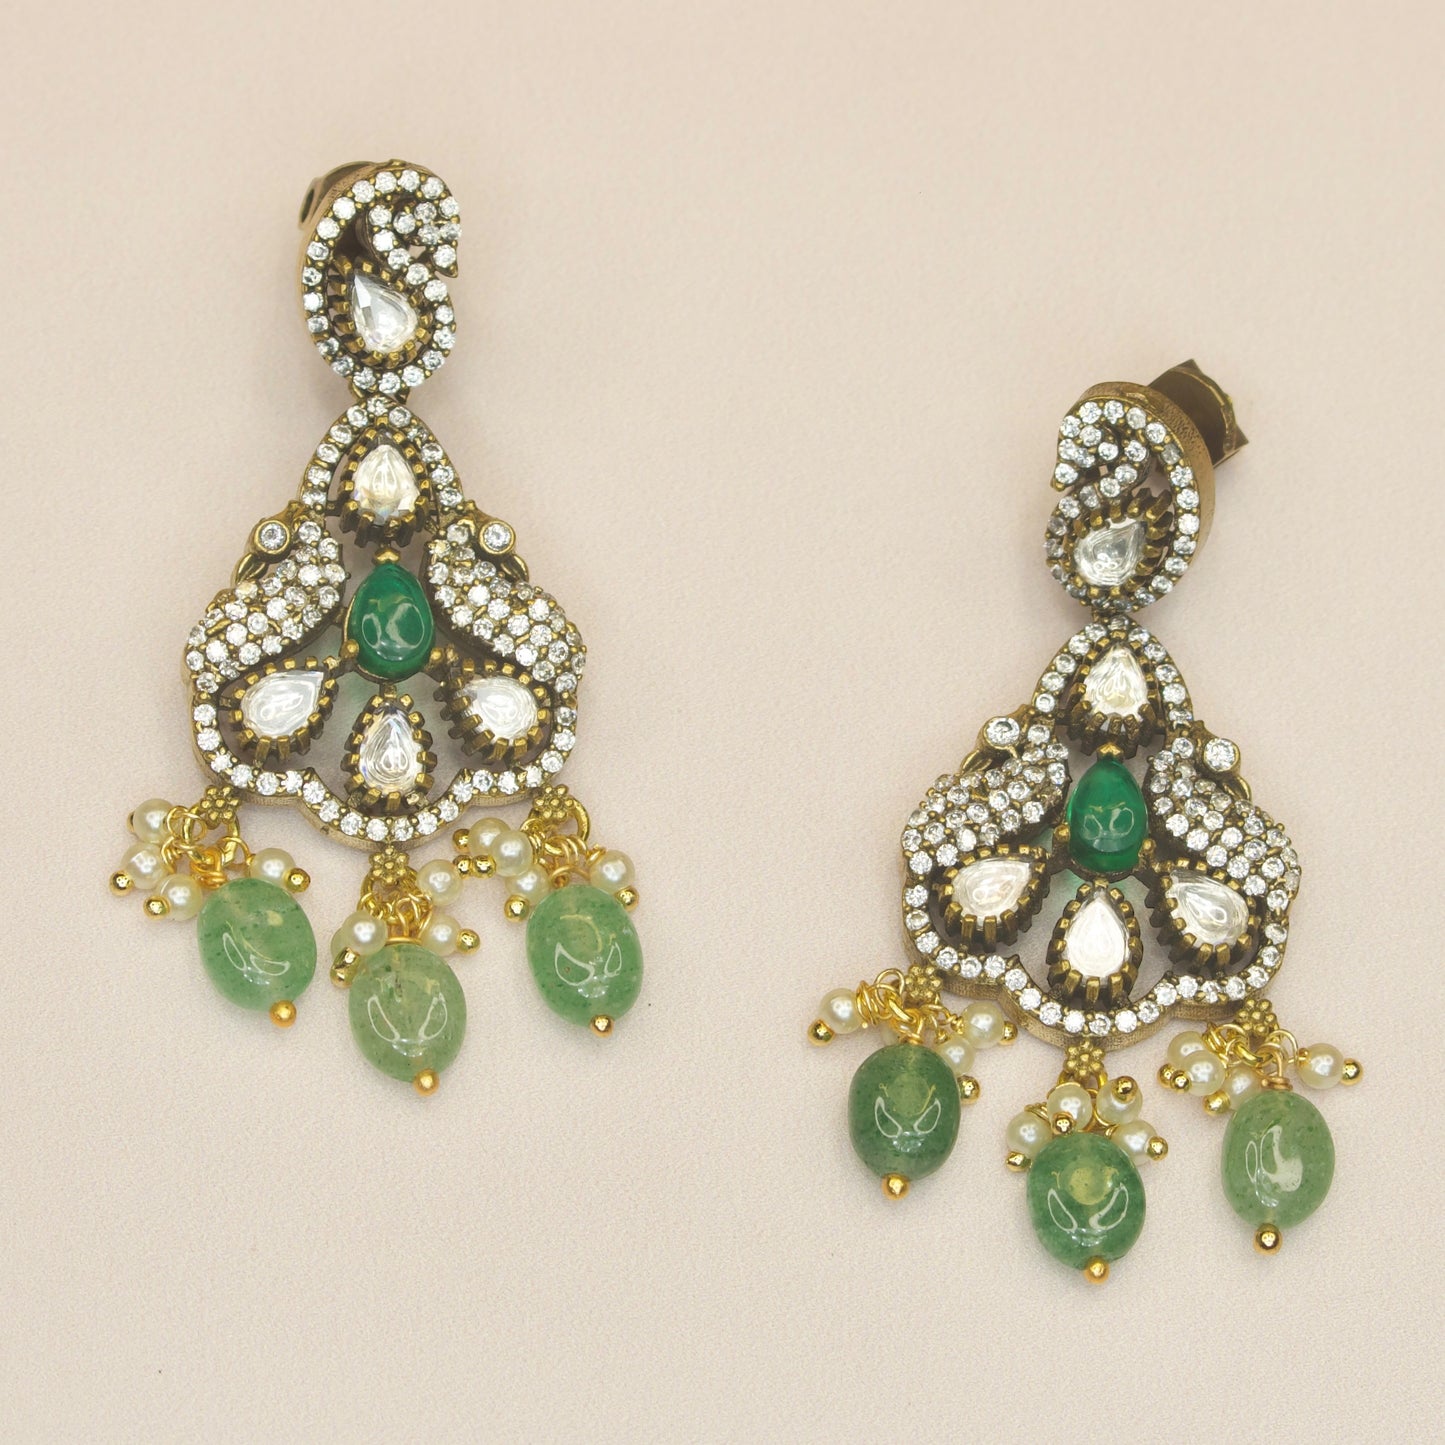 Peacock Victorian Zircon Necklace Set with earrings